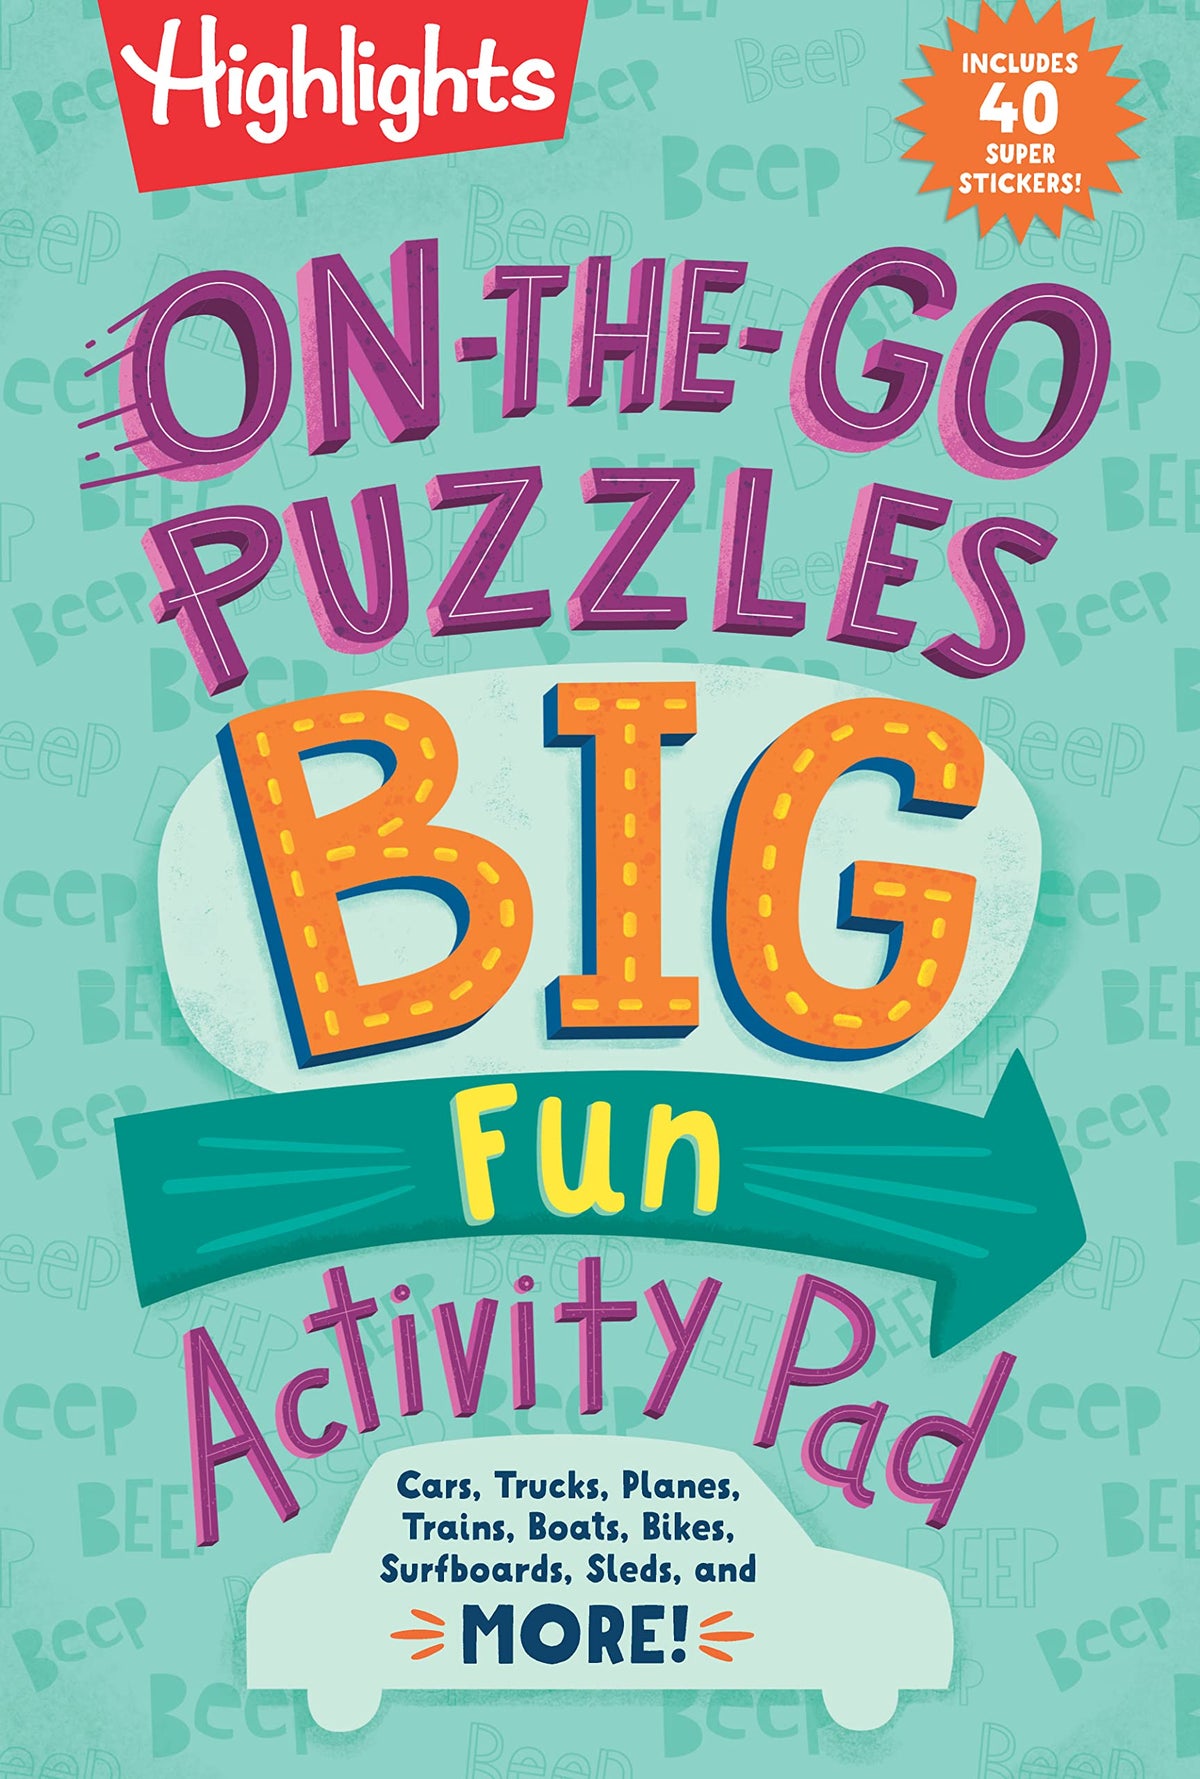 Highlights On the Go Puzzles: Big Fun Activity Pad